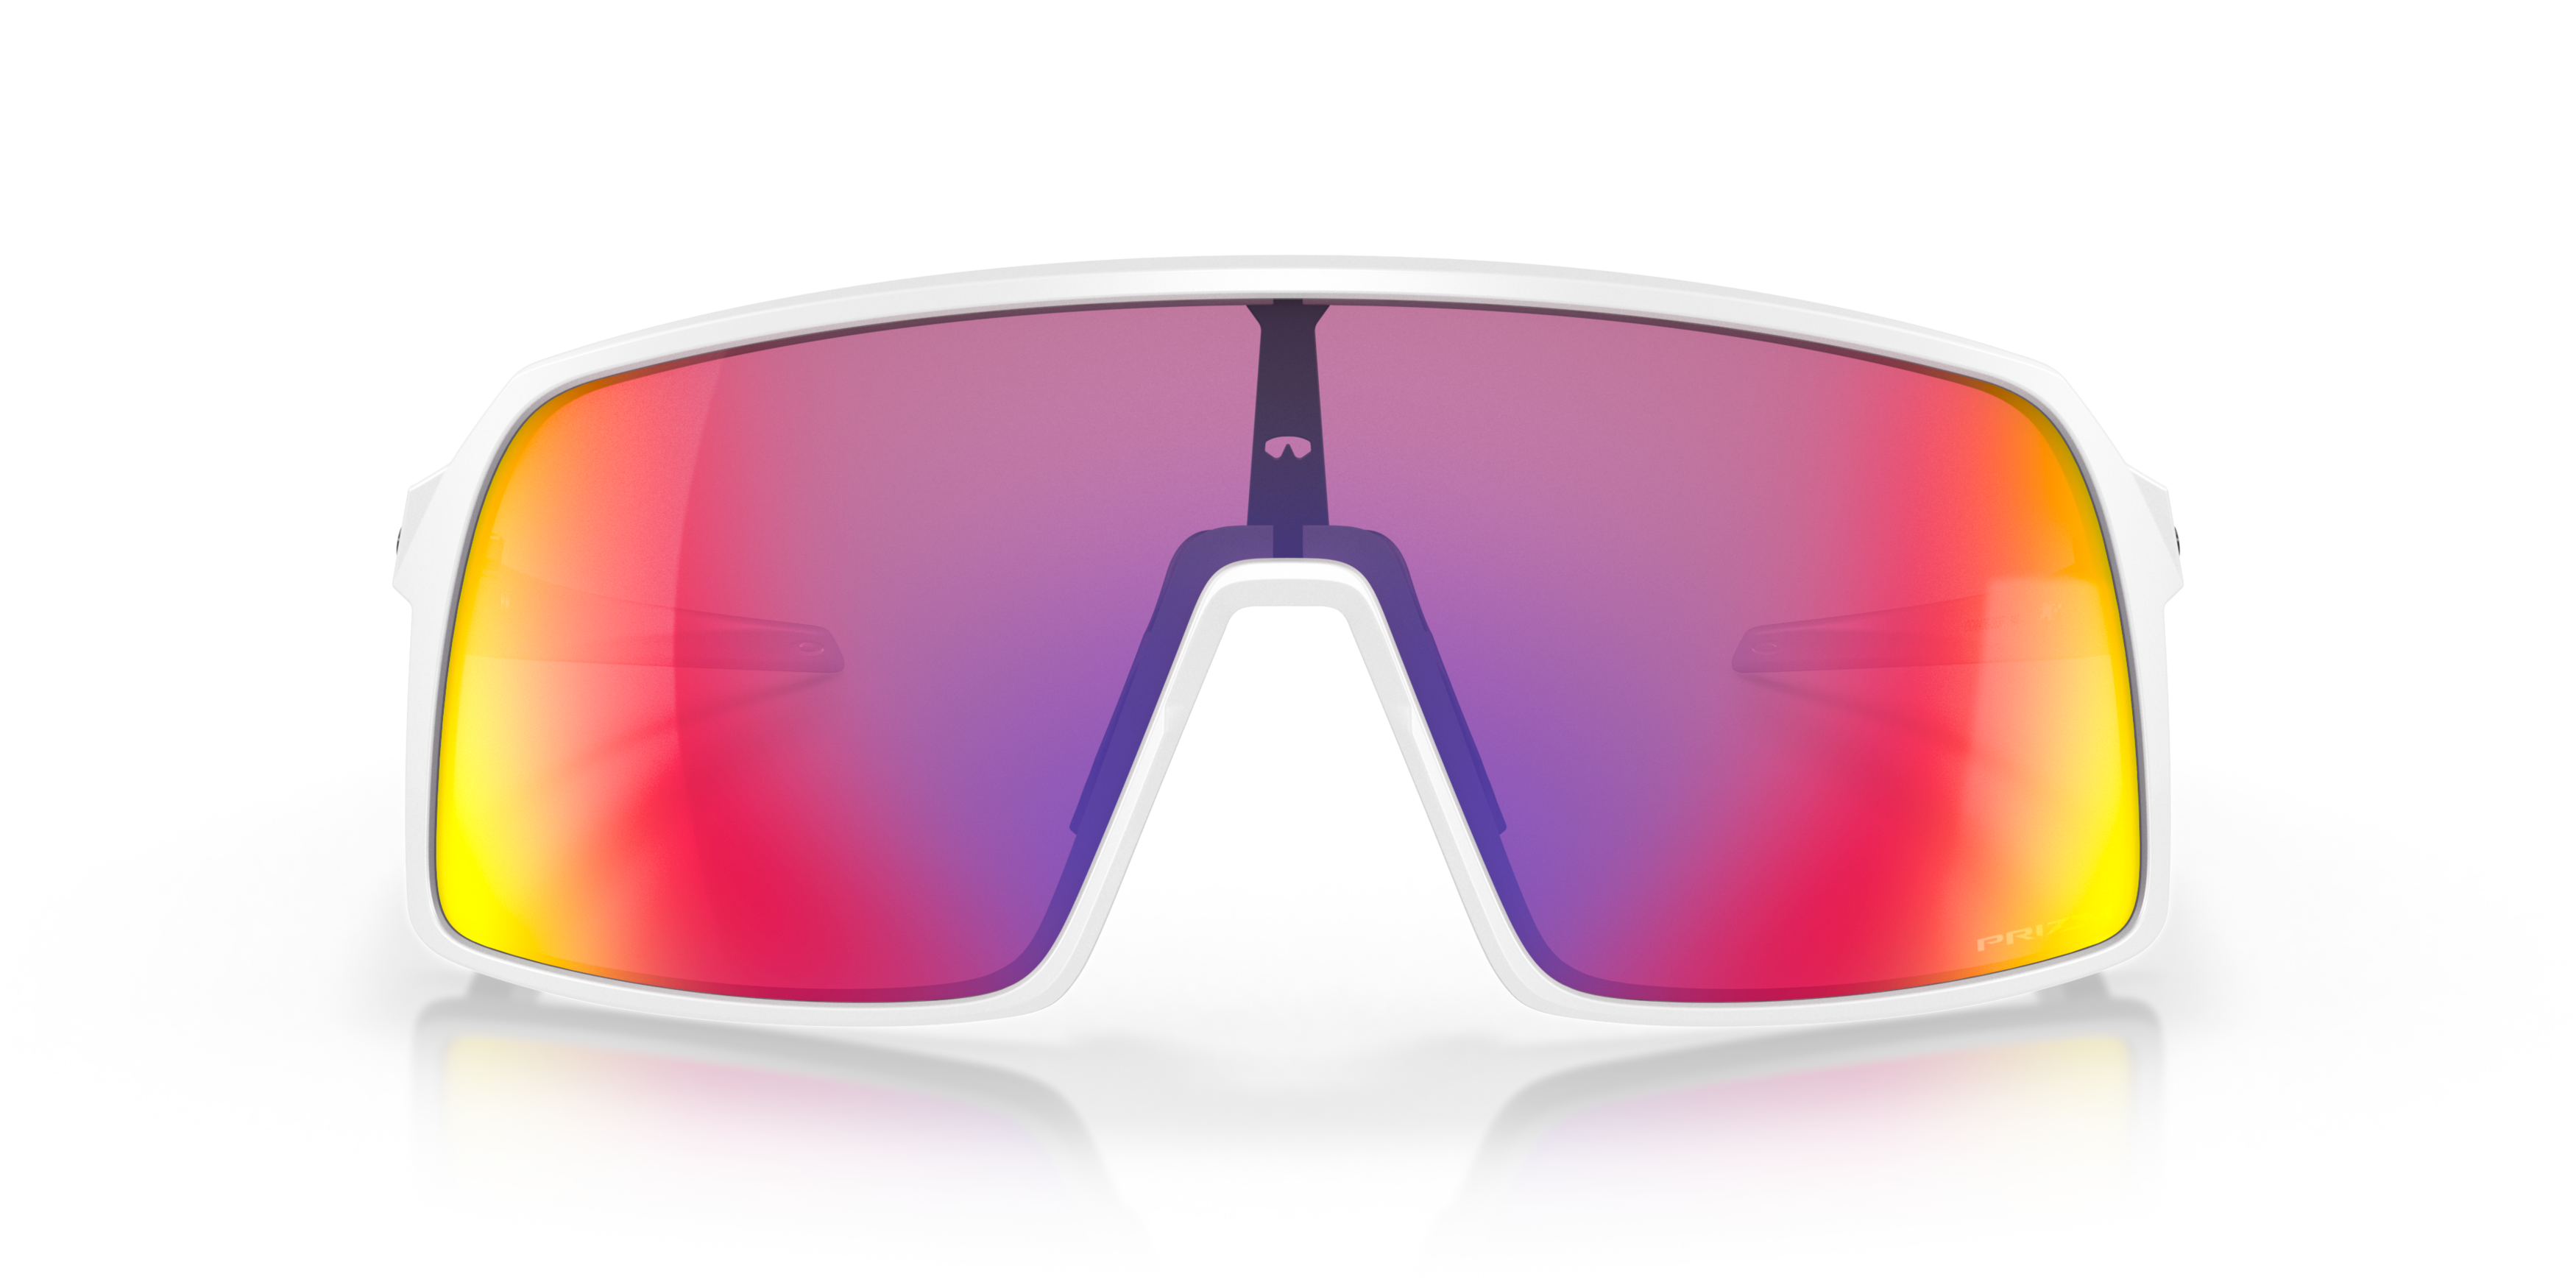 [products.image.front] OAKLEY OO9406 940606